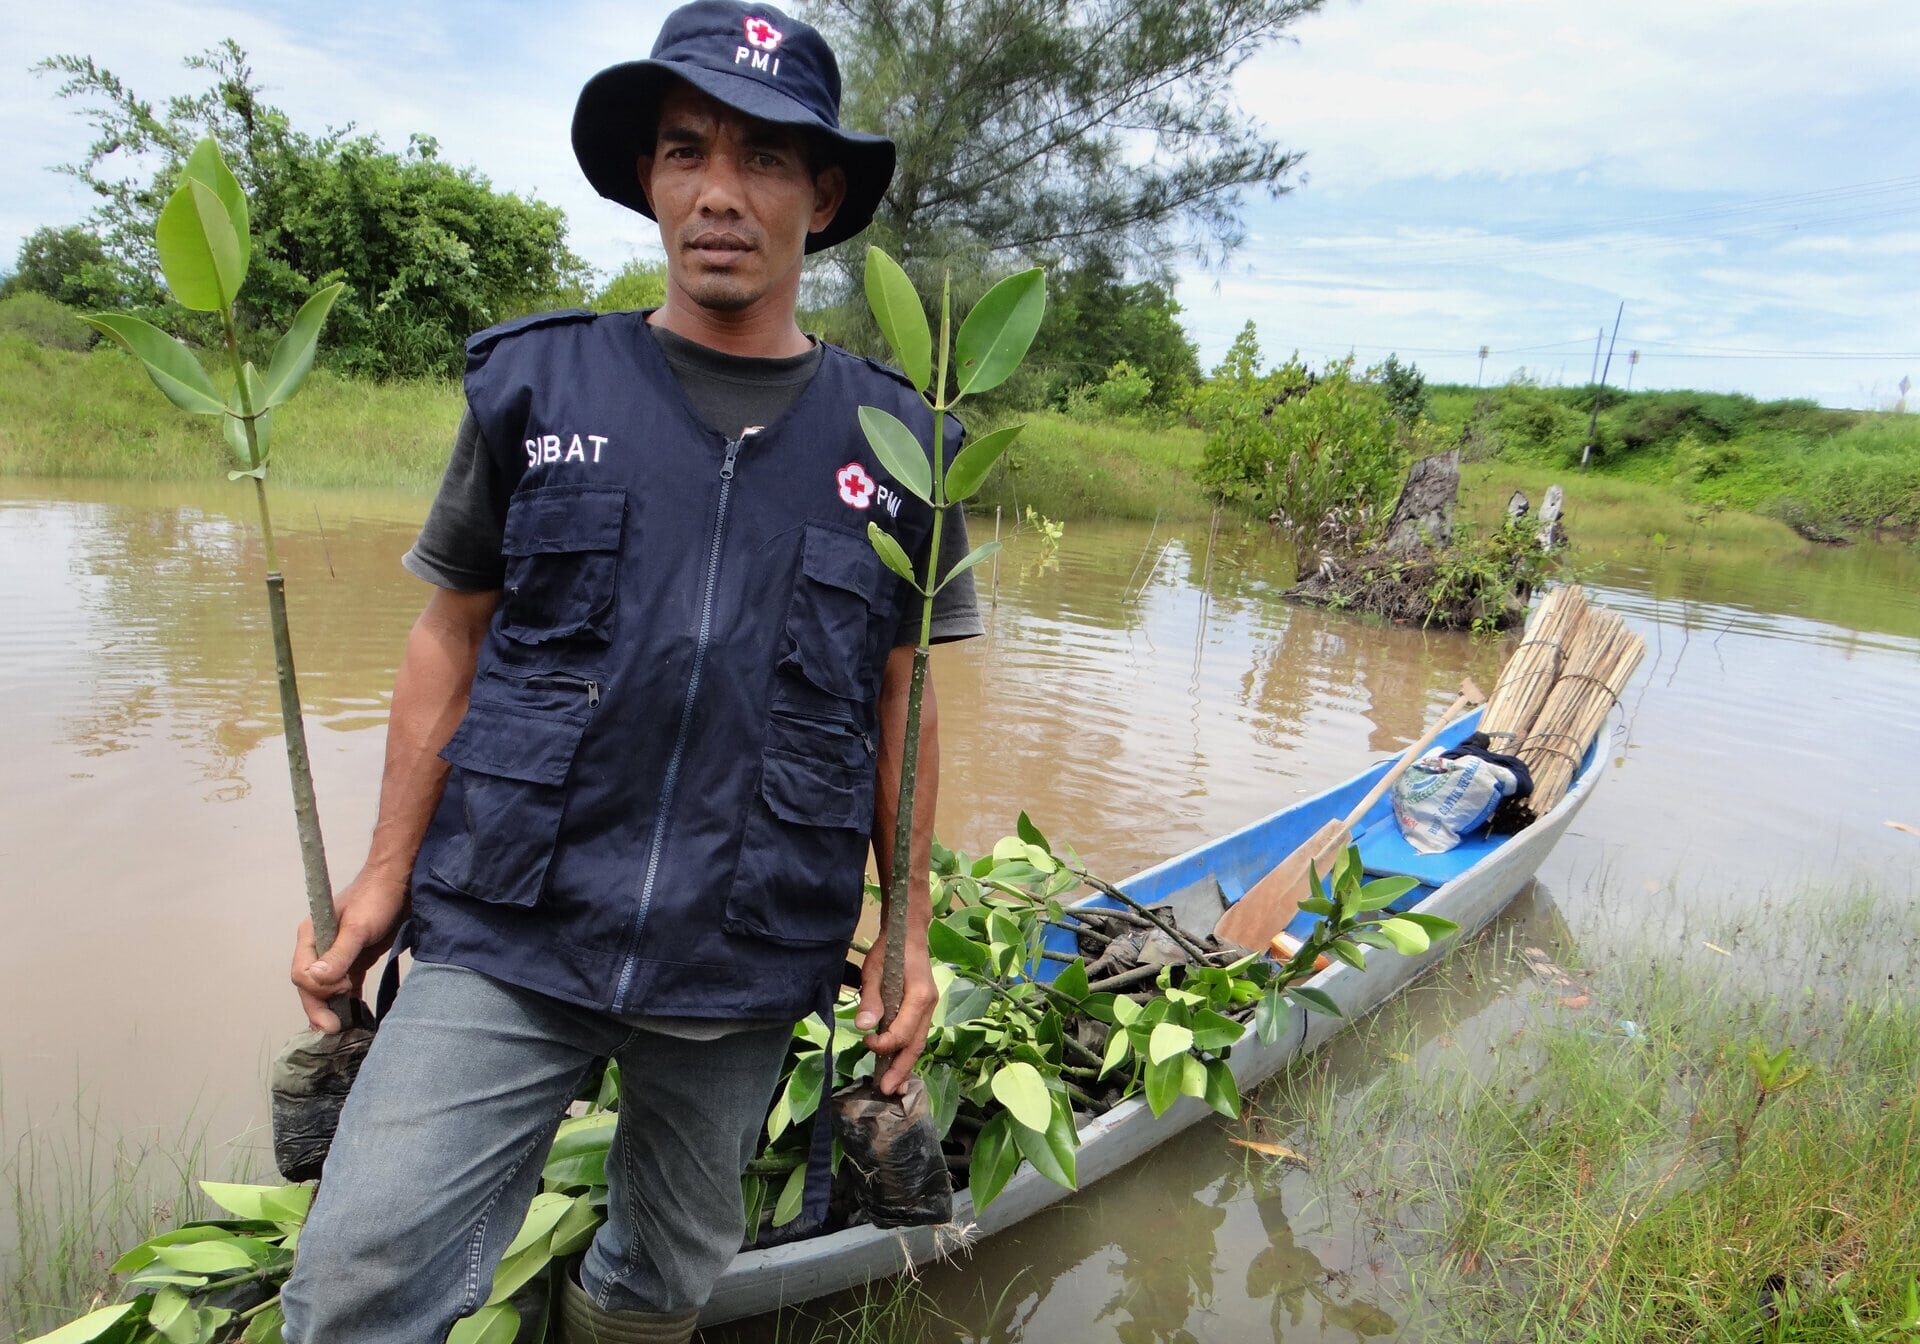 June 5, 2014. Aceh Jaya, Indonesia. A Red Cross volunteer loads his canoe full of mangrove saplings in preparation for planting. The American Red Cross is continuing to help villages, like this one in Indonesia, rebuild from the 2004 Indian Ocean Tsunami. By planting mangroves, the Red Cross is restoring an ecosystem that was severely damaged by the natural disaster. Mangroves not only slow down storm surges and slow erosion, but they also absorb three times as much carbon dioxide as other trees, dissolve heavy metals like mercury from the soil and water, and provide a habitat for shrimp and oysters. With the help of volunteers, the Red Cross is planting mangrove and casuarina trees throughout coastal areas of Indonesia. The American Red Cross provided relief in the immediate aftermath of the 2004 Indian Ocean Tsunami, but also invested in long-term projects to ensure that towns build back stronger, healthier, and better prepared for future disasters that may come their way. Photo by Jenelle Eli/American Red Cross